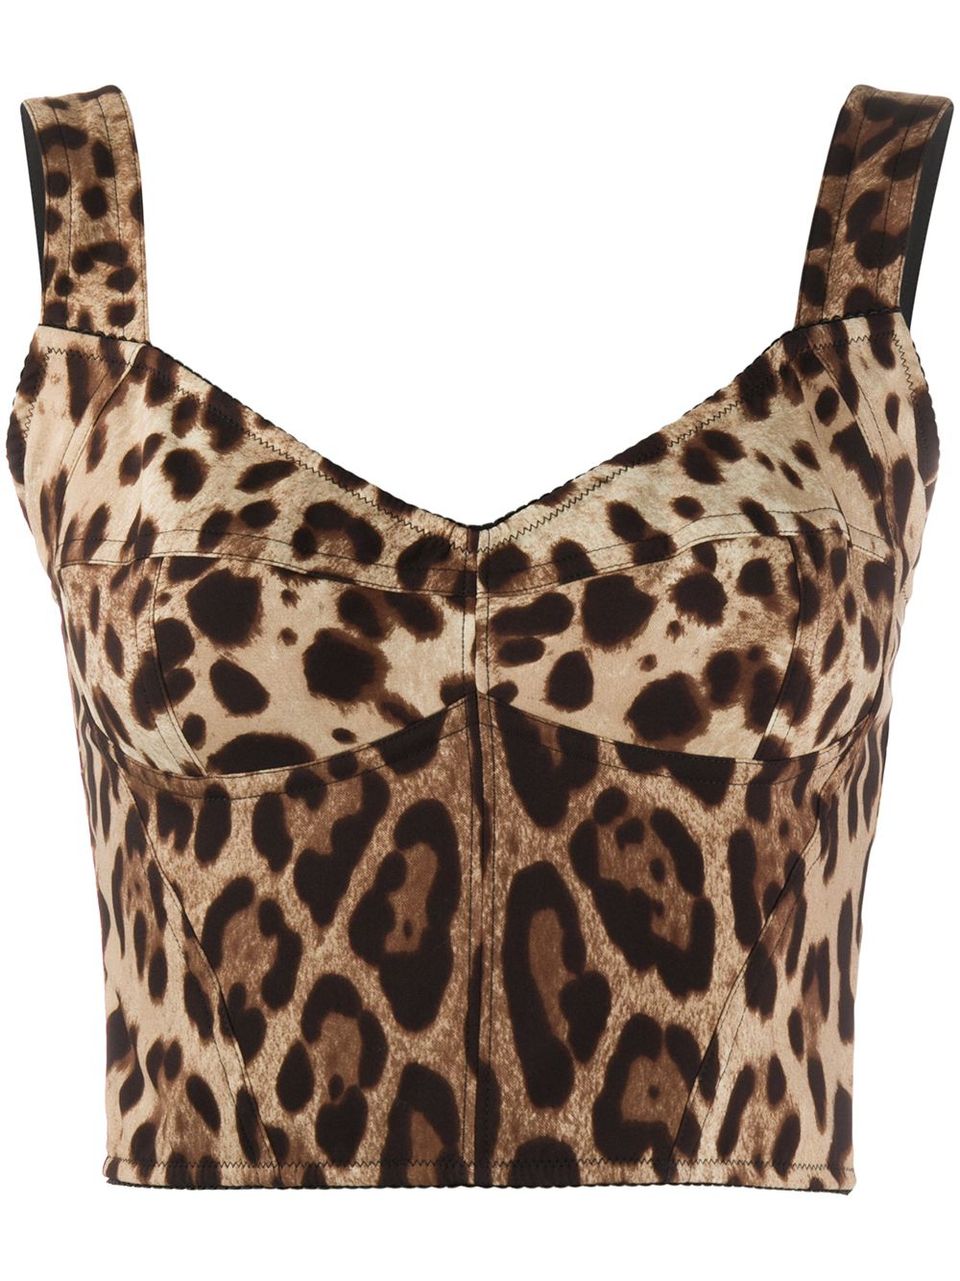 Leopard print satin bustier top by UK Glamorous at Three Fates – Three  Fates Shop